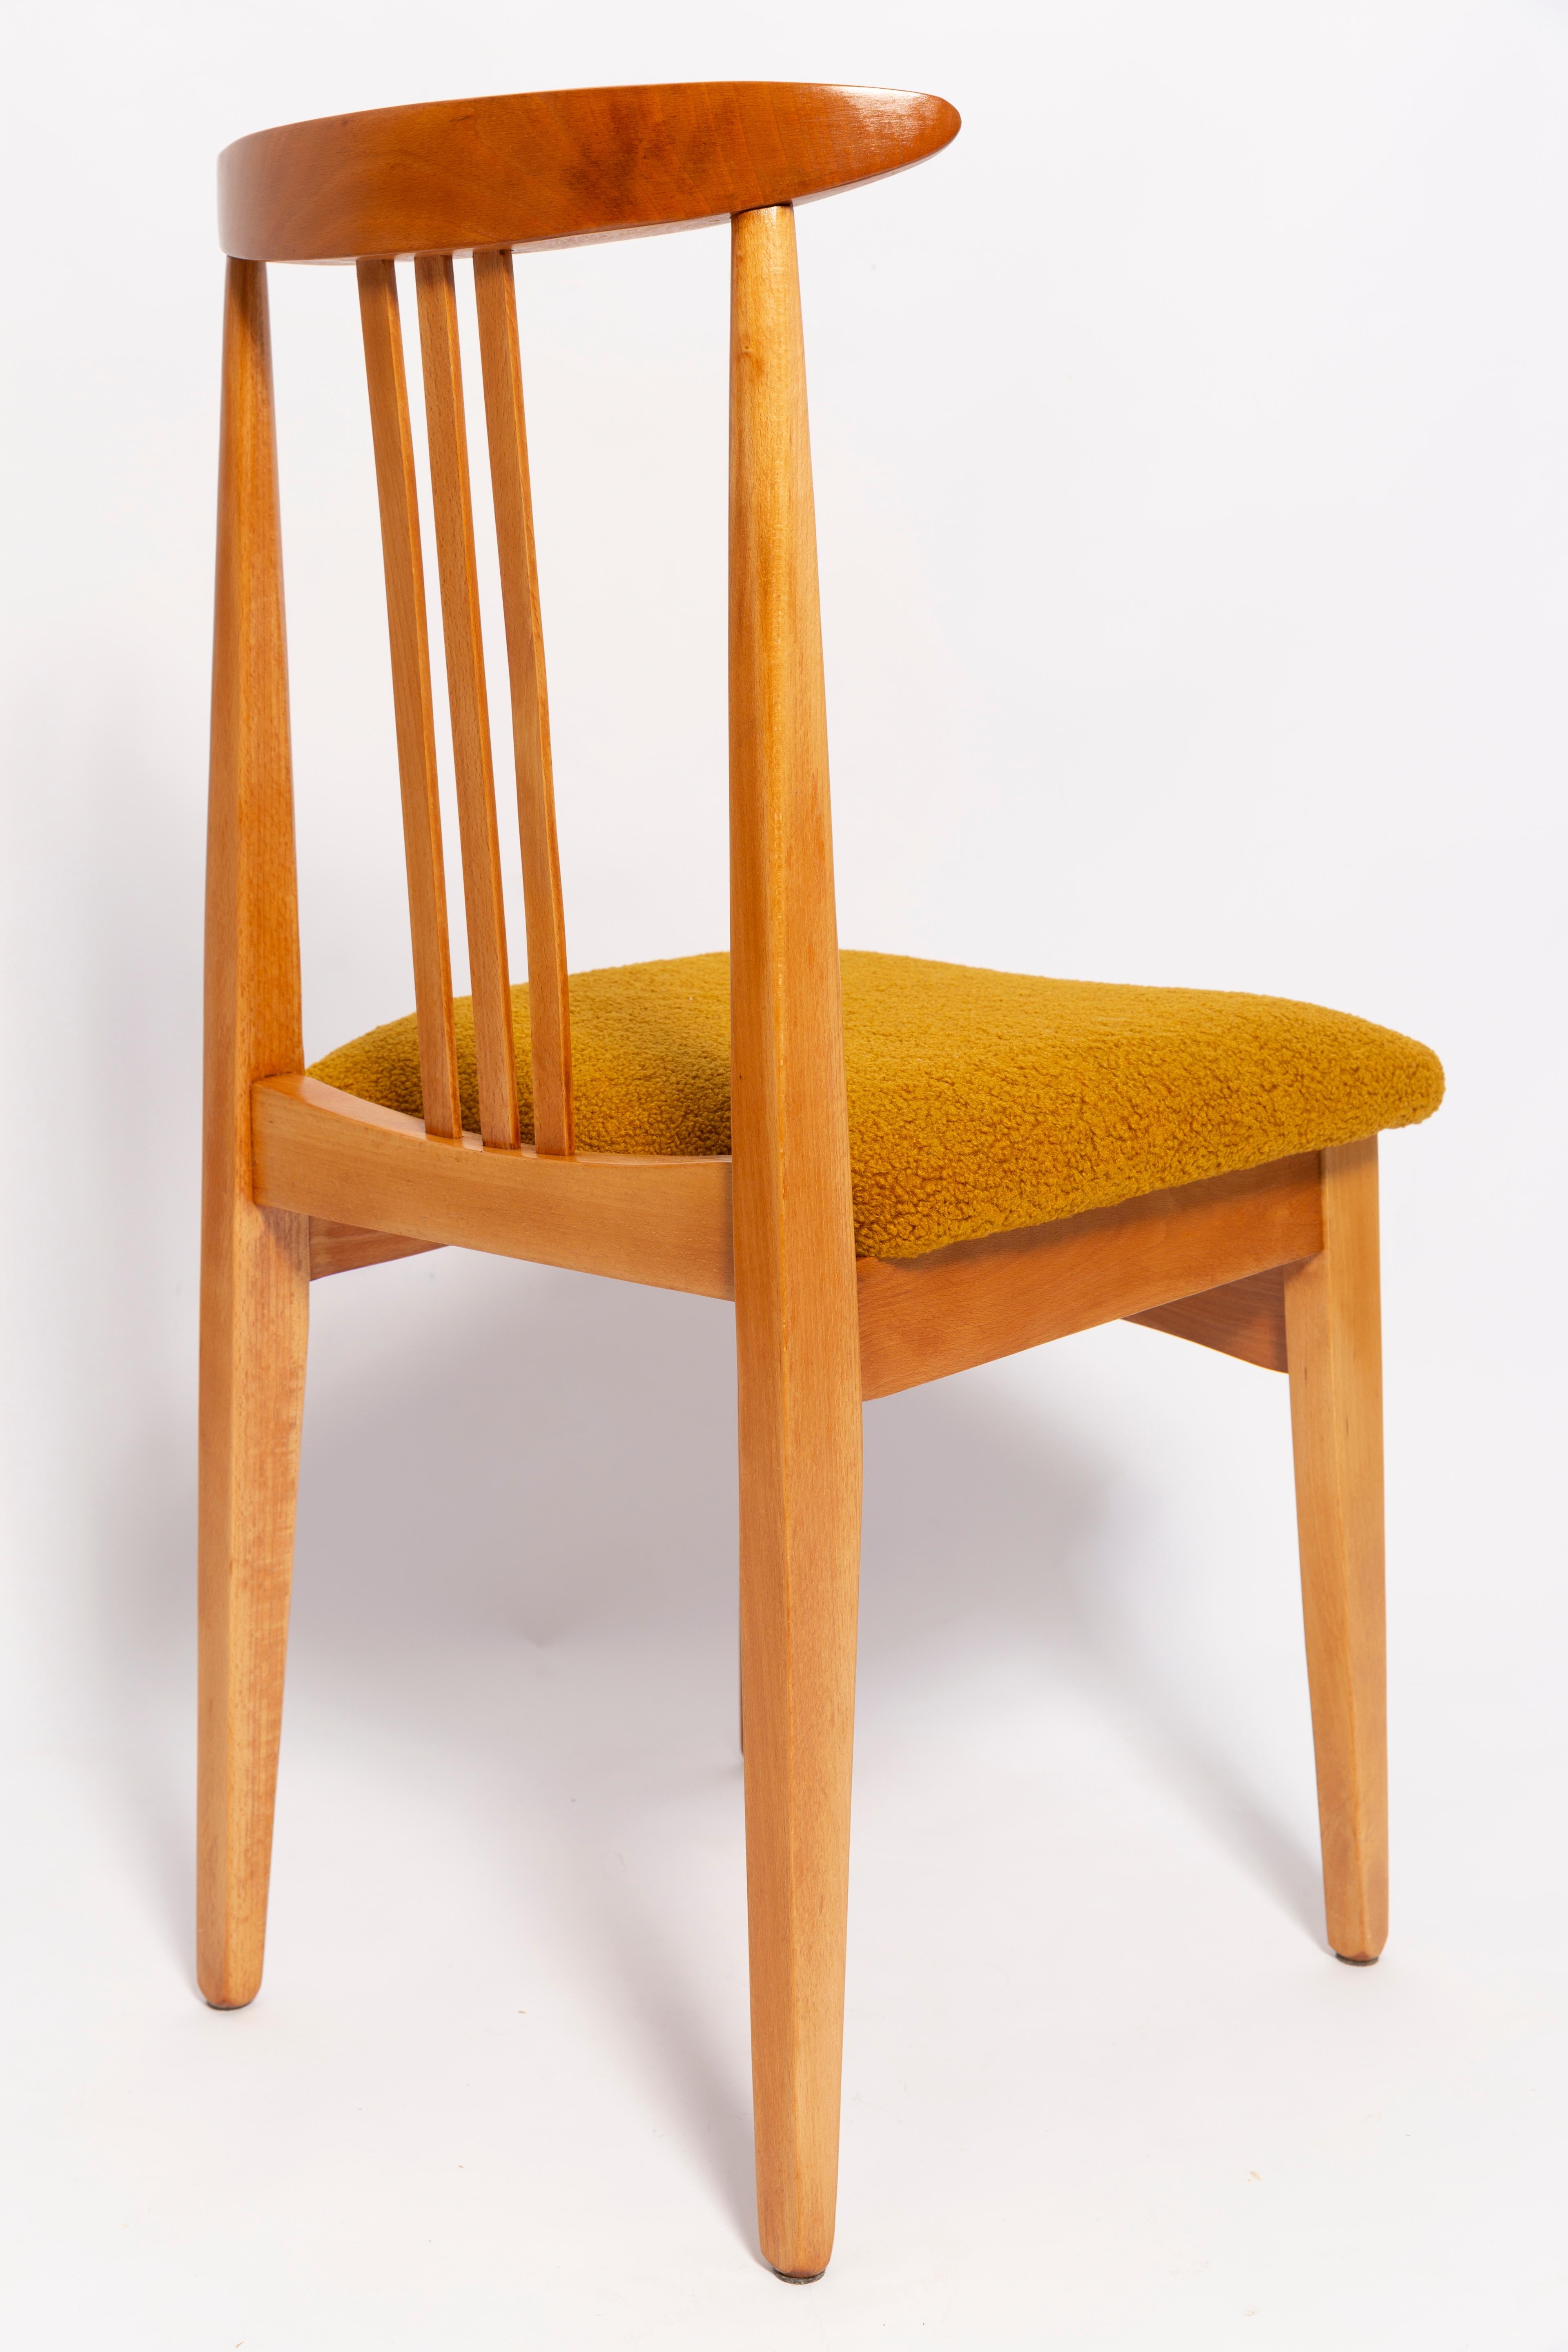 Hand-Crafted Mid-Century Ochre Boucle Chair, Light Wood, M. Zielinski, Europe 1960s For Sale